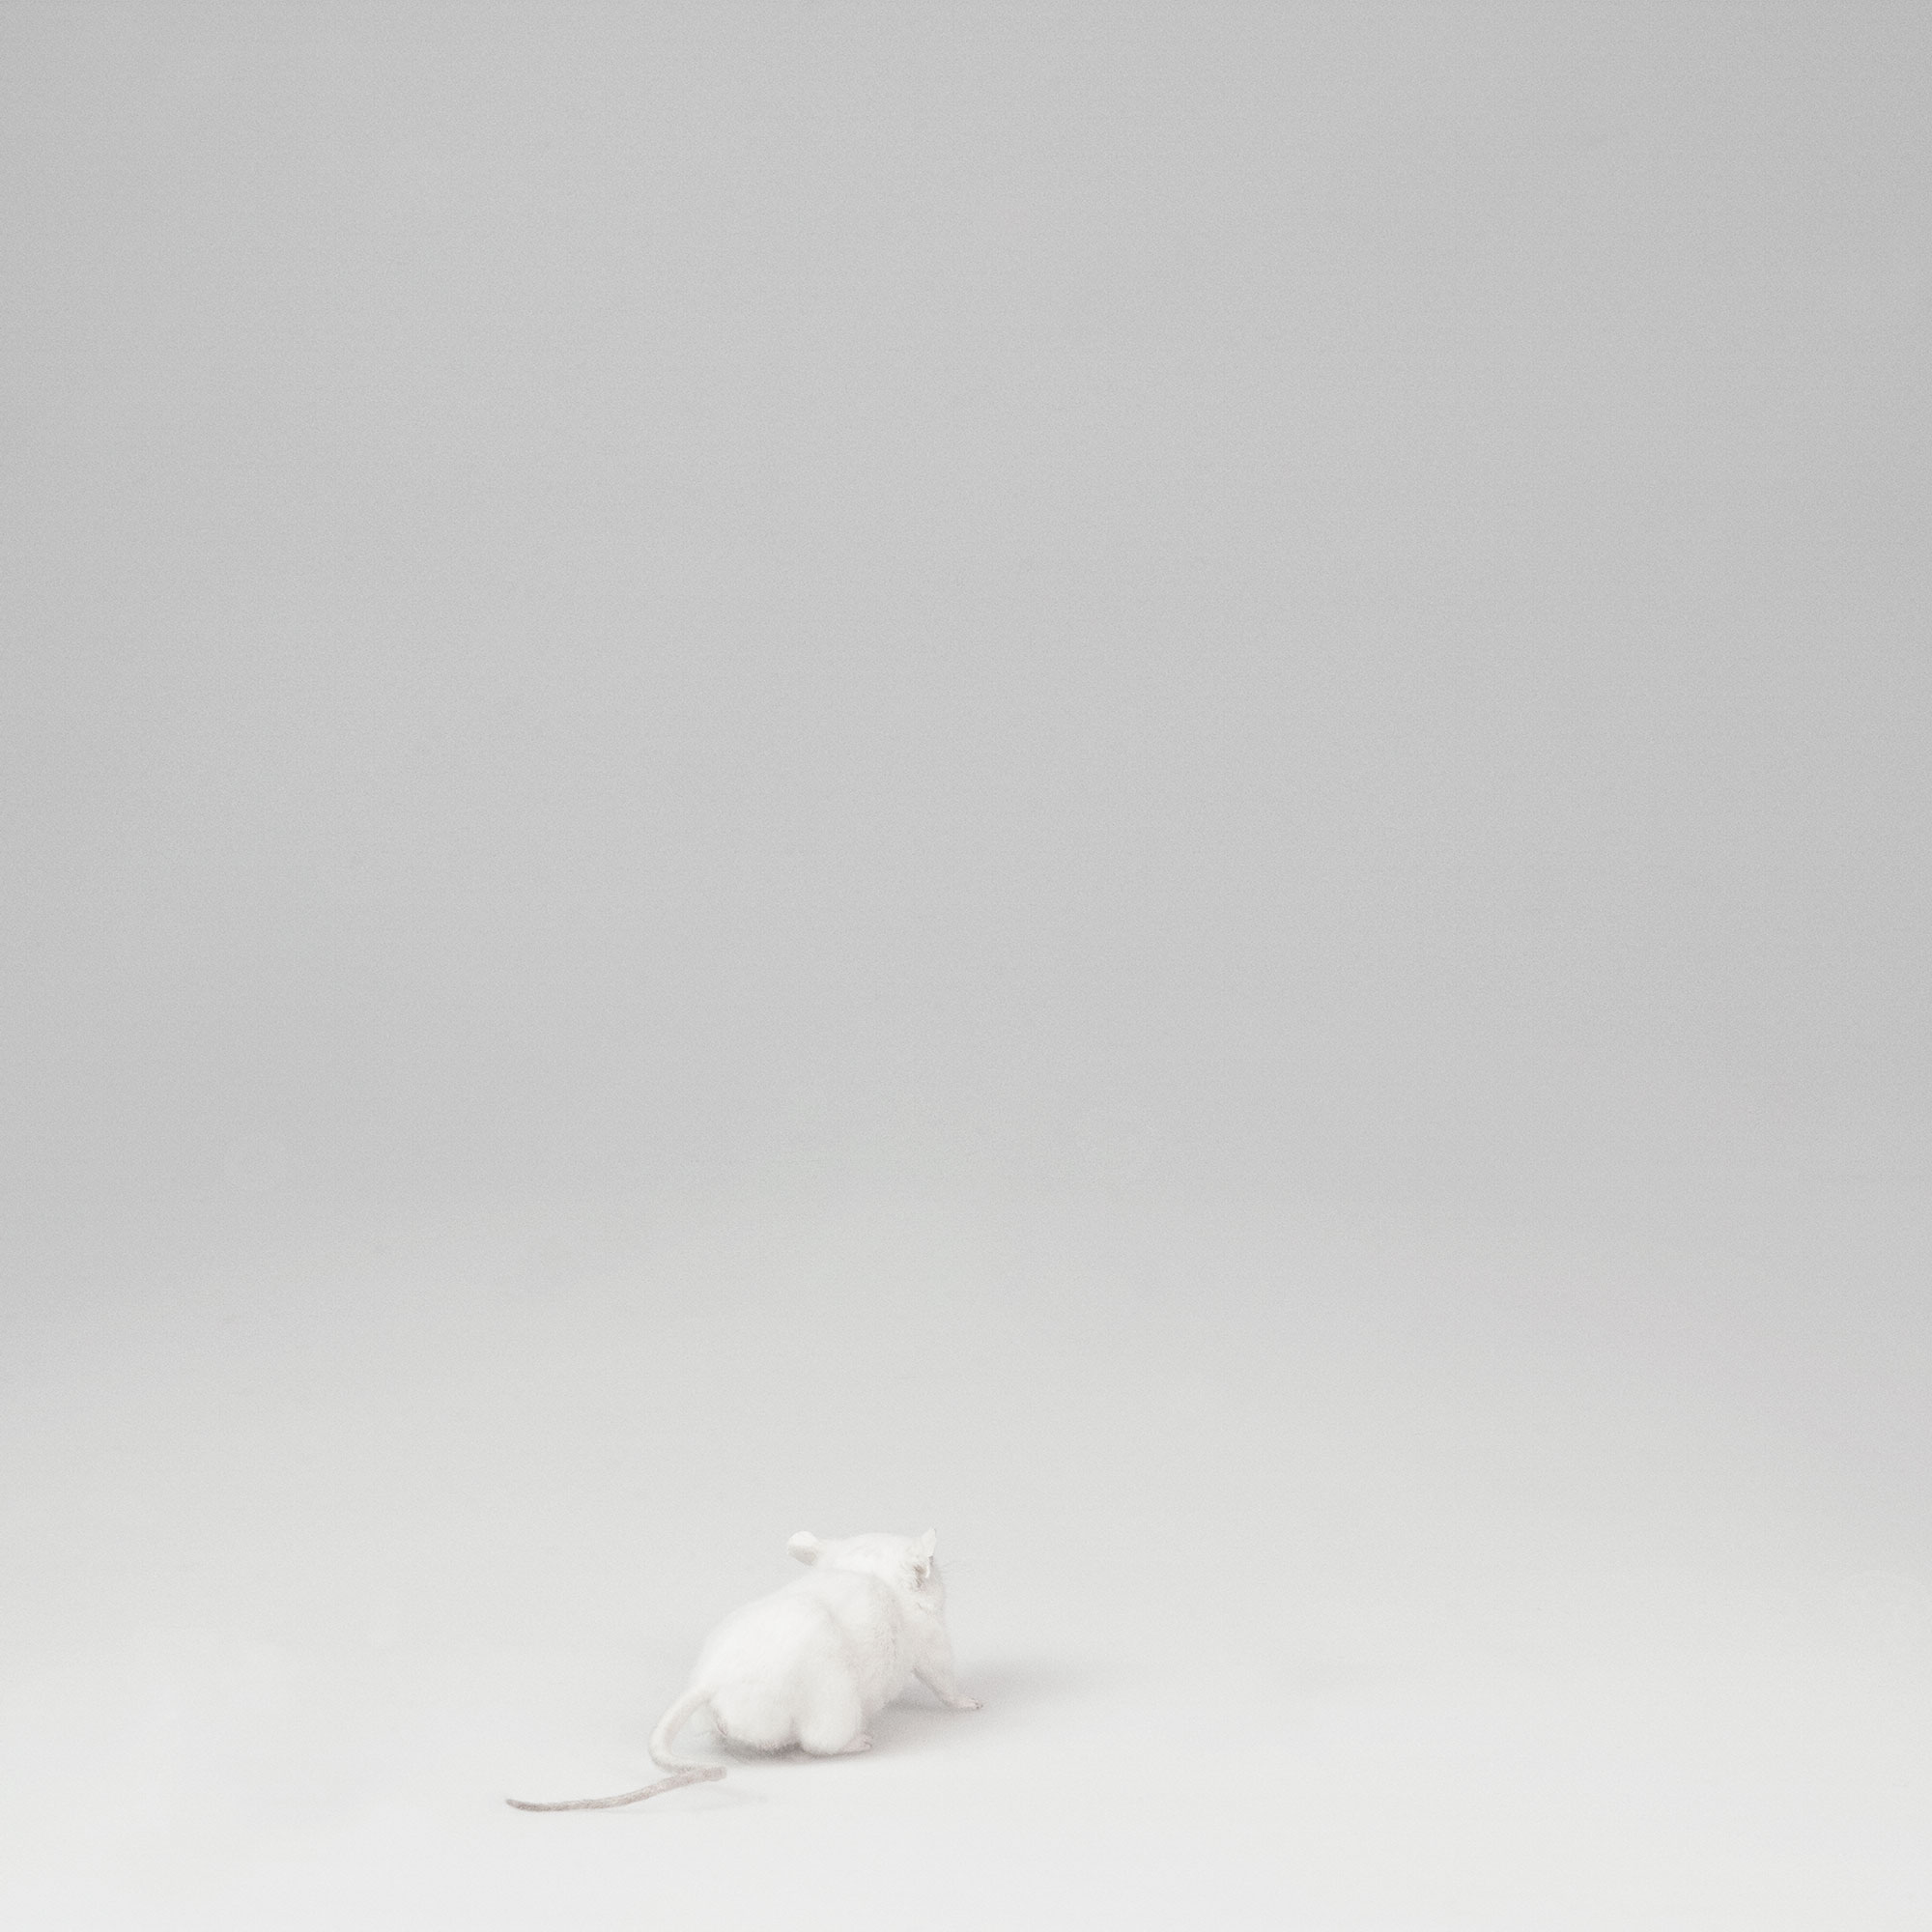 To a Mouse, 2010